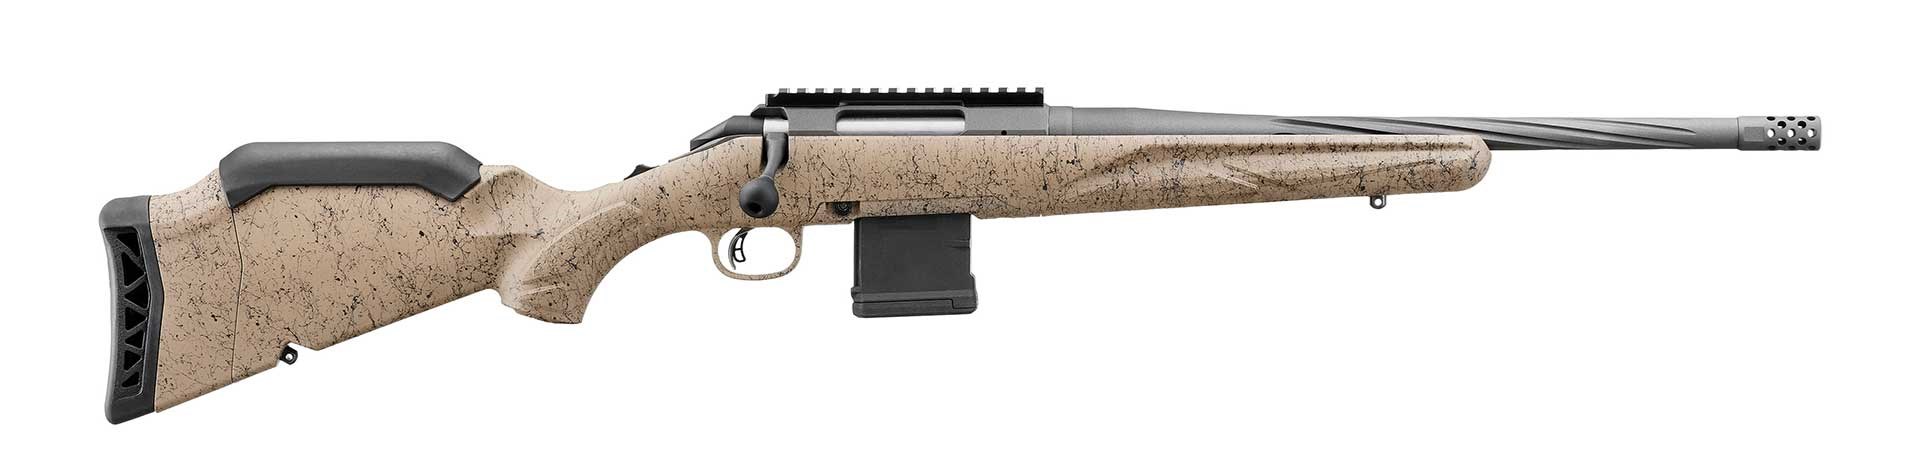 Right side of the Ruger American Rifle Generation II Ranch Model.